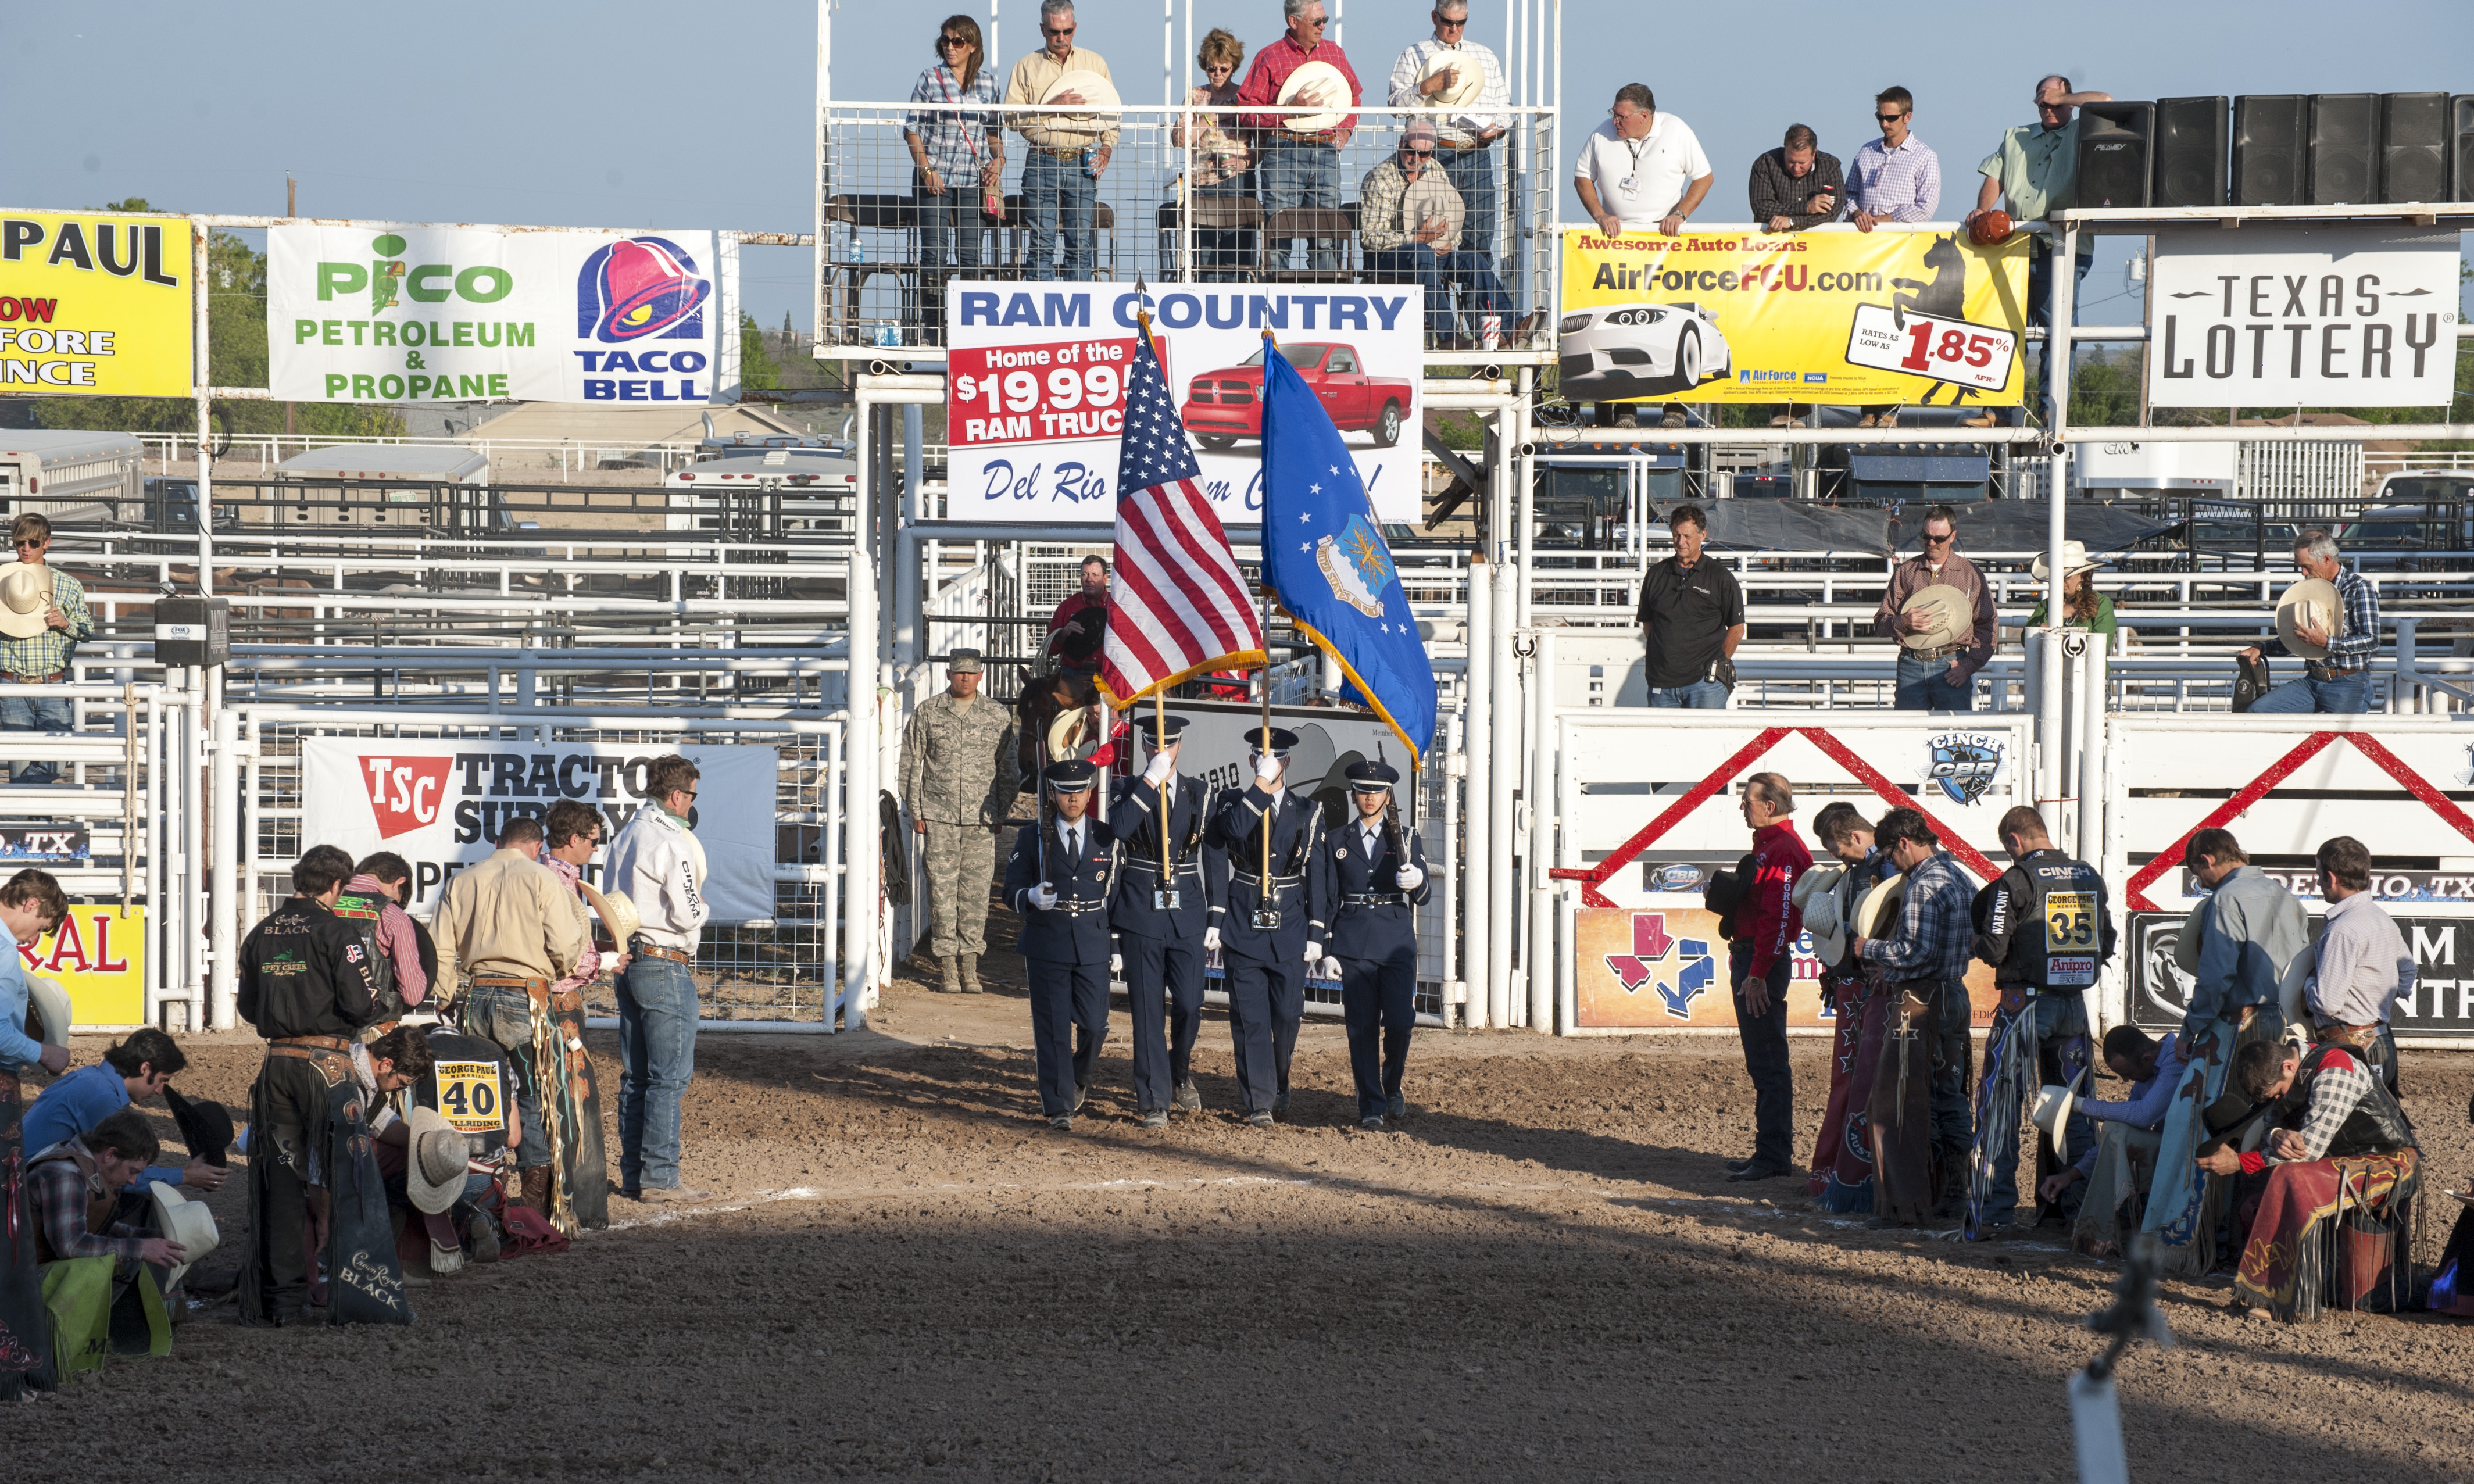 36th annual Paul Memorial Bull Riding competition